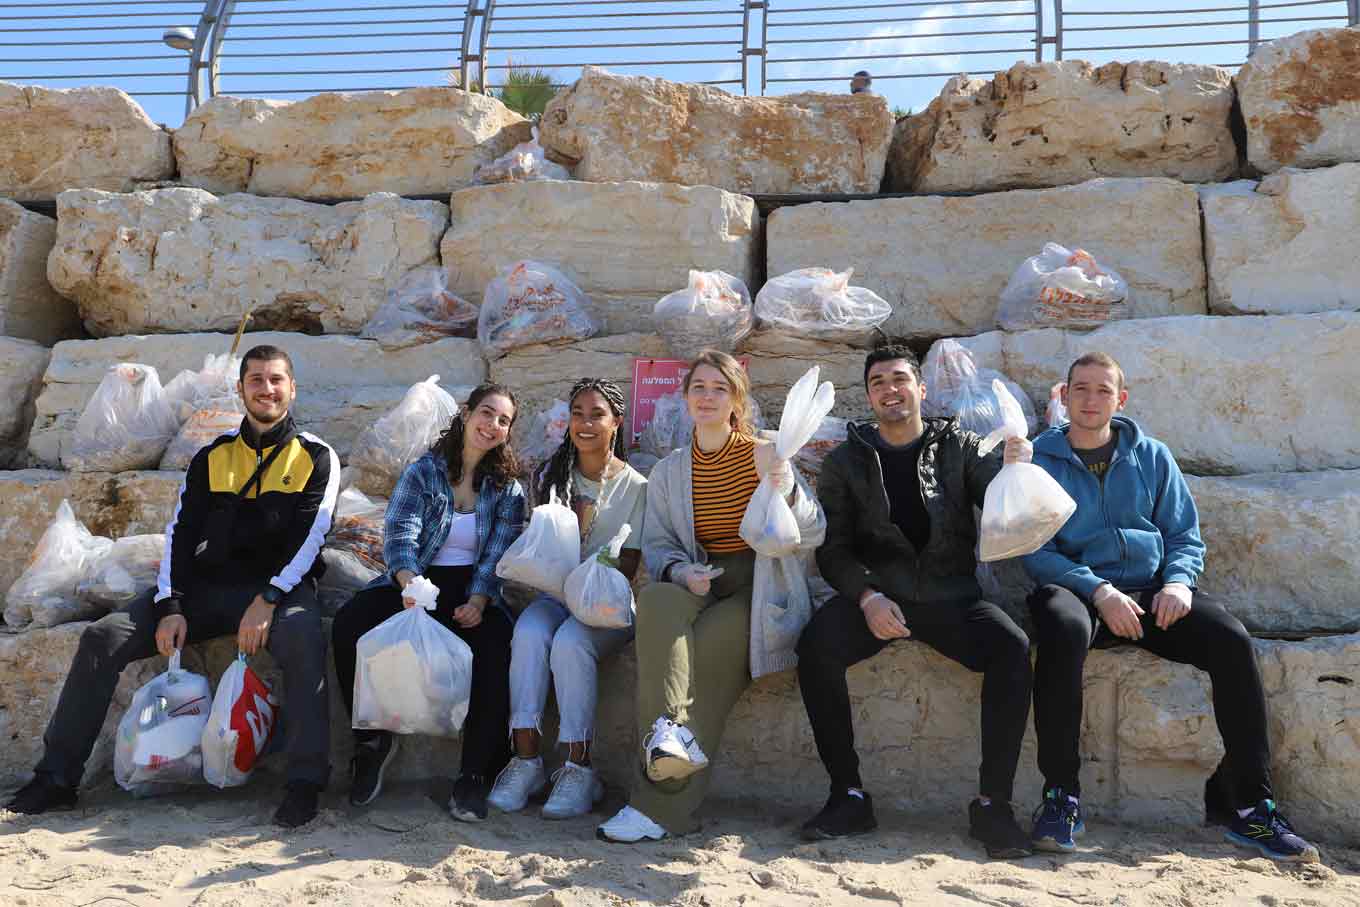 A group of 6 people sit on large rocks, holding up bags of trash.